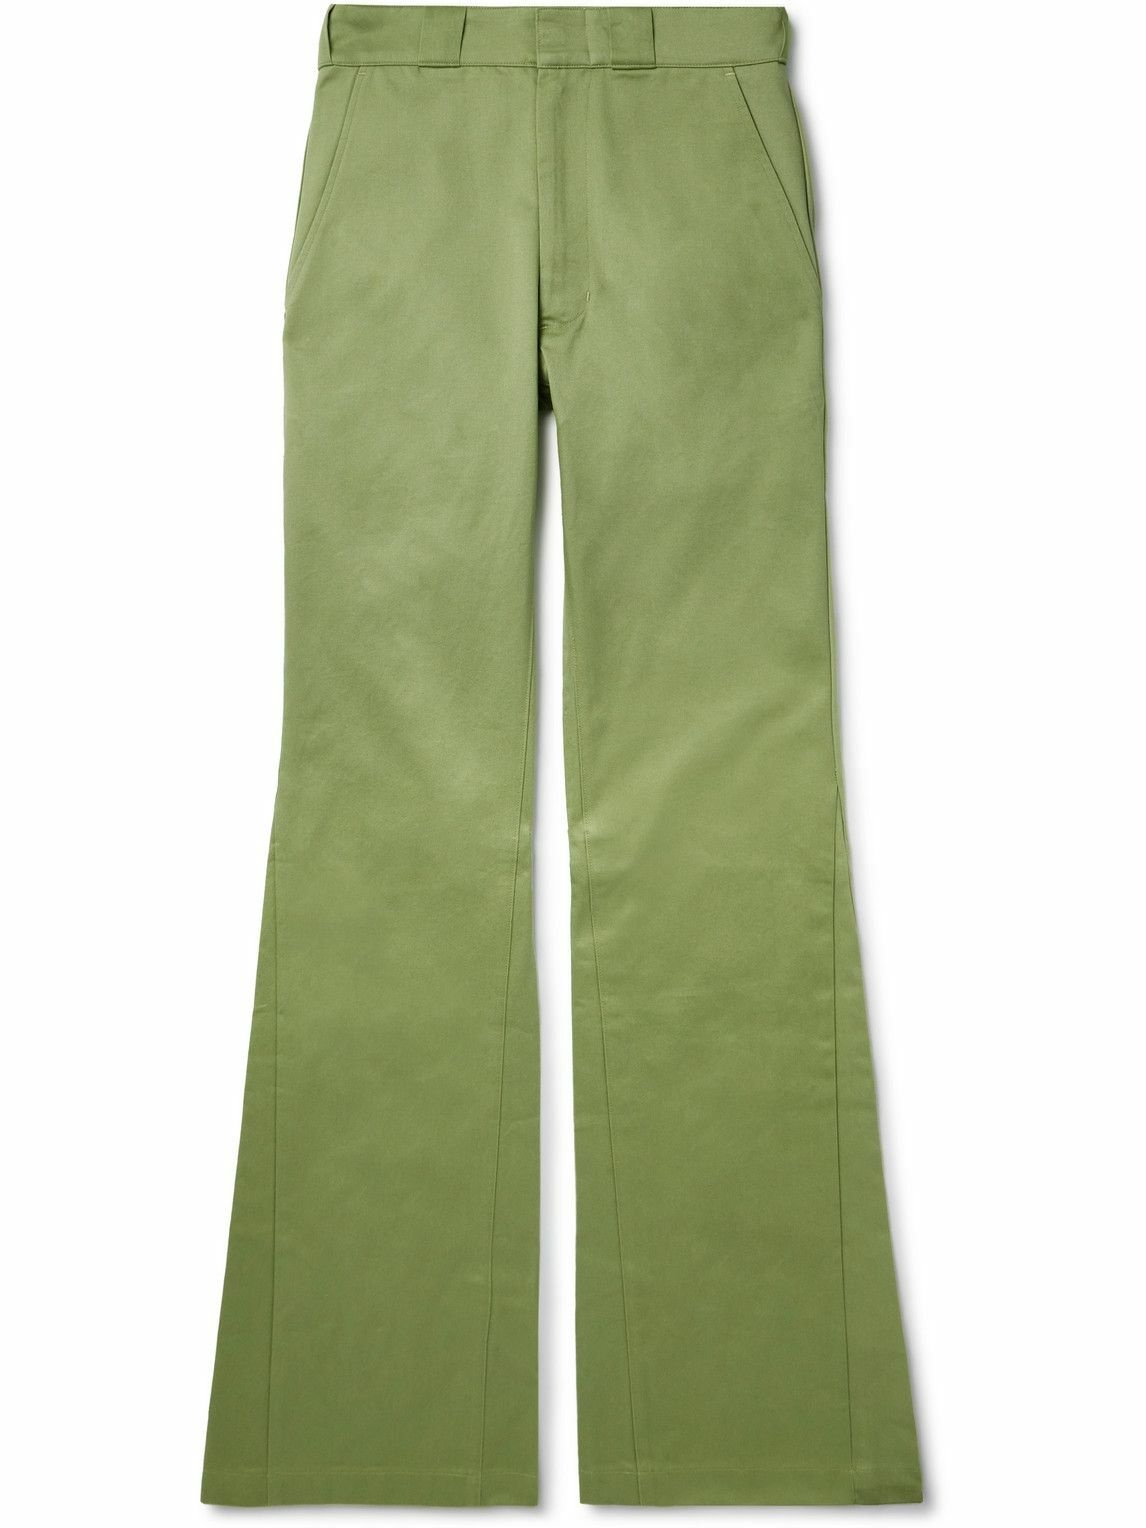 Photo: Gallery Dept. - Bootcut Cotton-Twill Chinos - Green